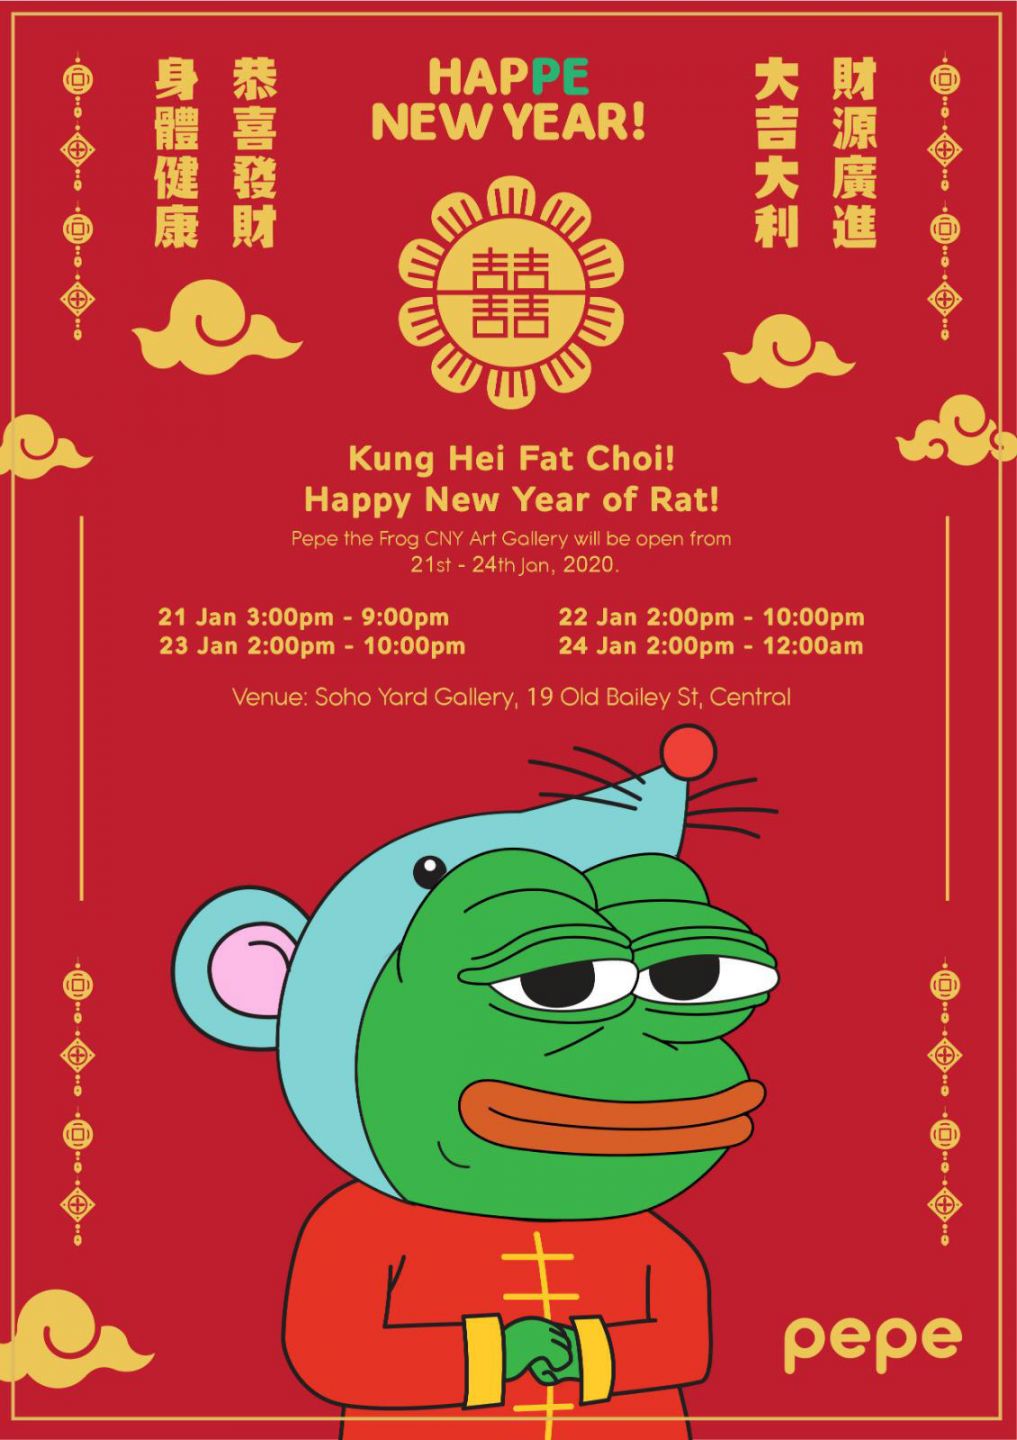 Pepe 新年pop-up store - Timable Hong Kong Event